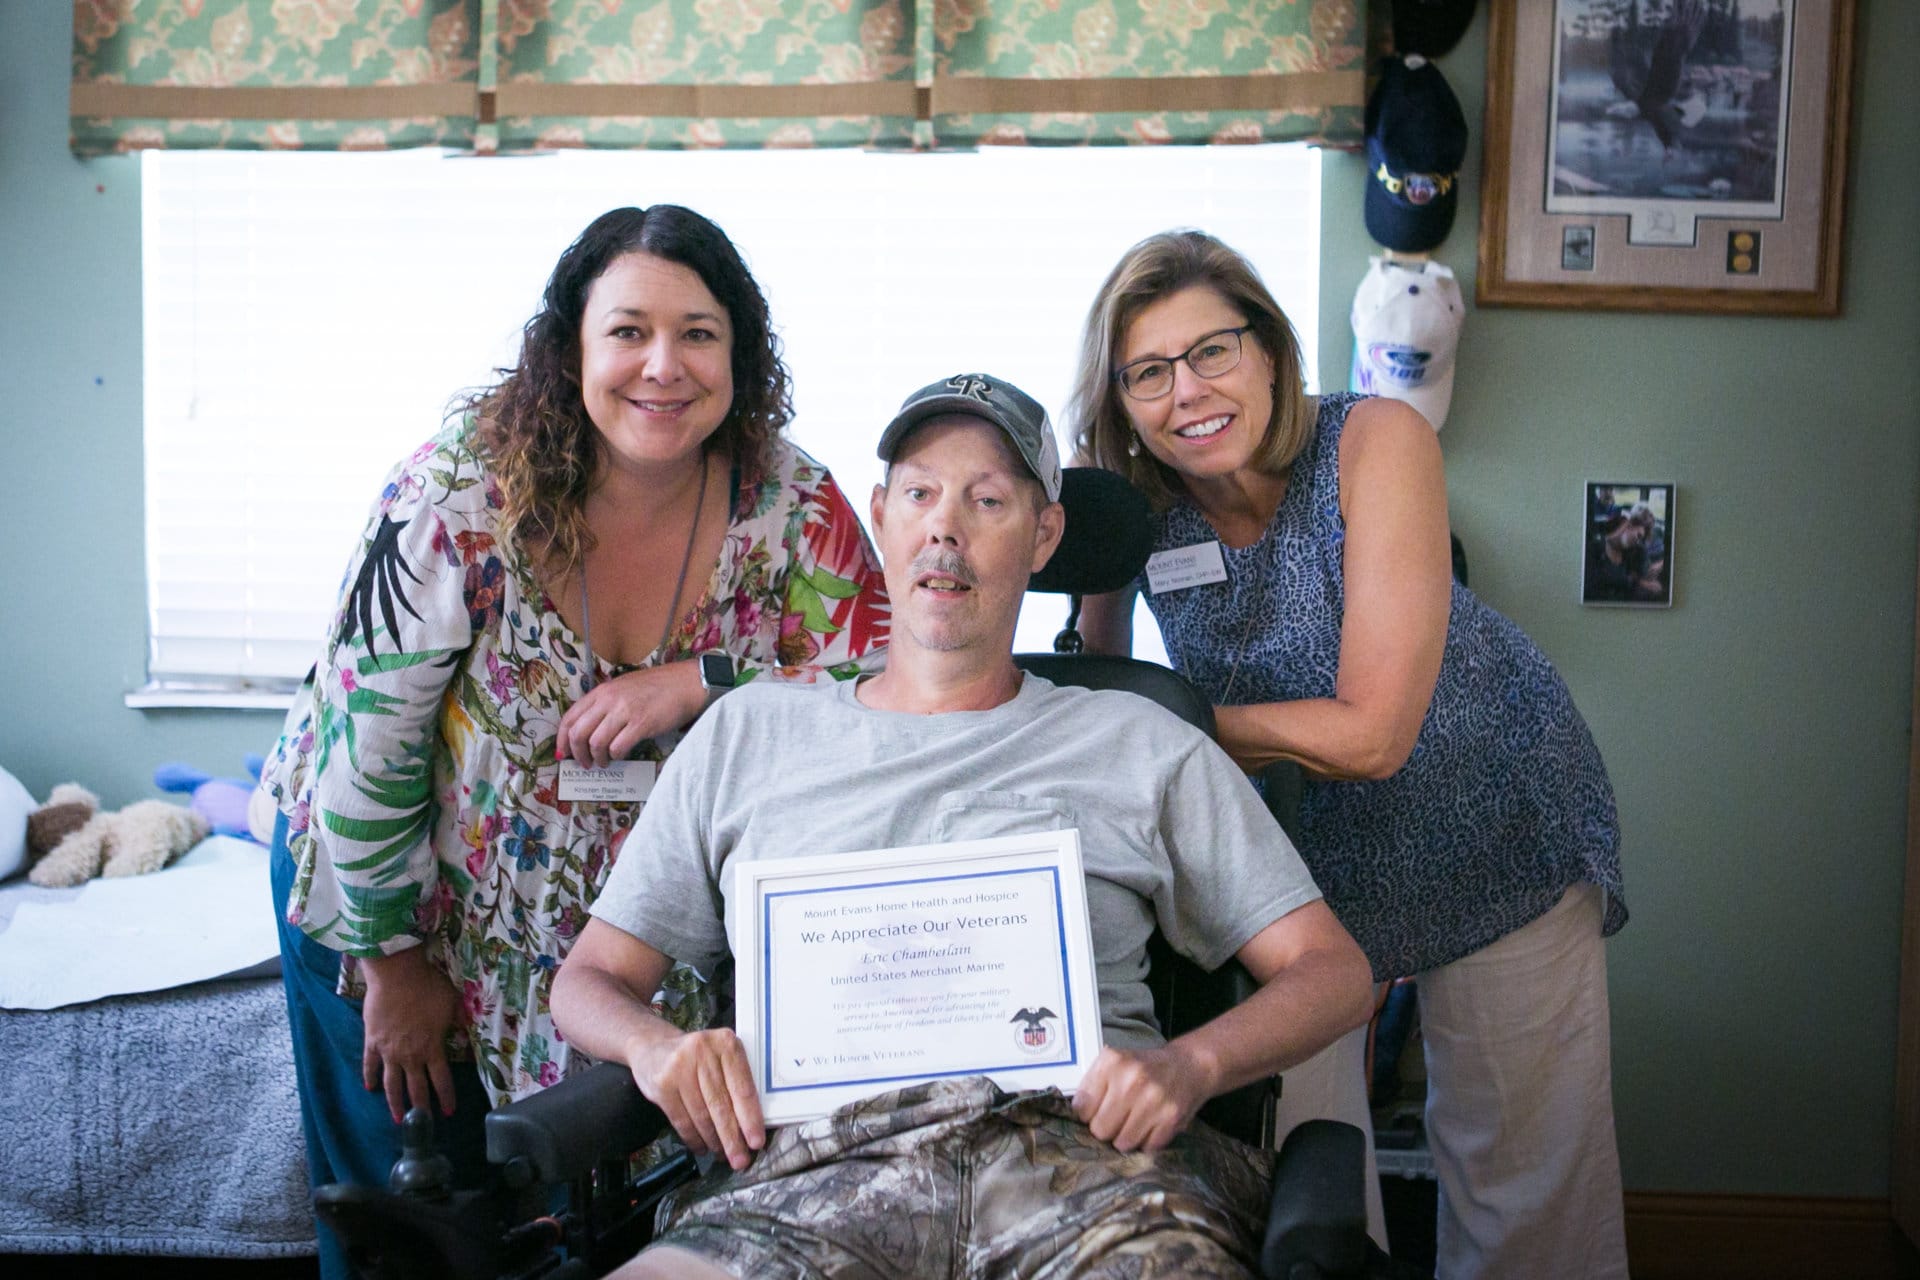 Two health care professionals with patient in wheel chair holding a "Veterans Appreciation" certificate.